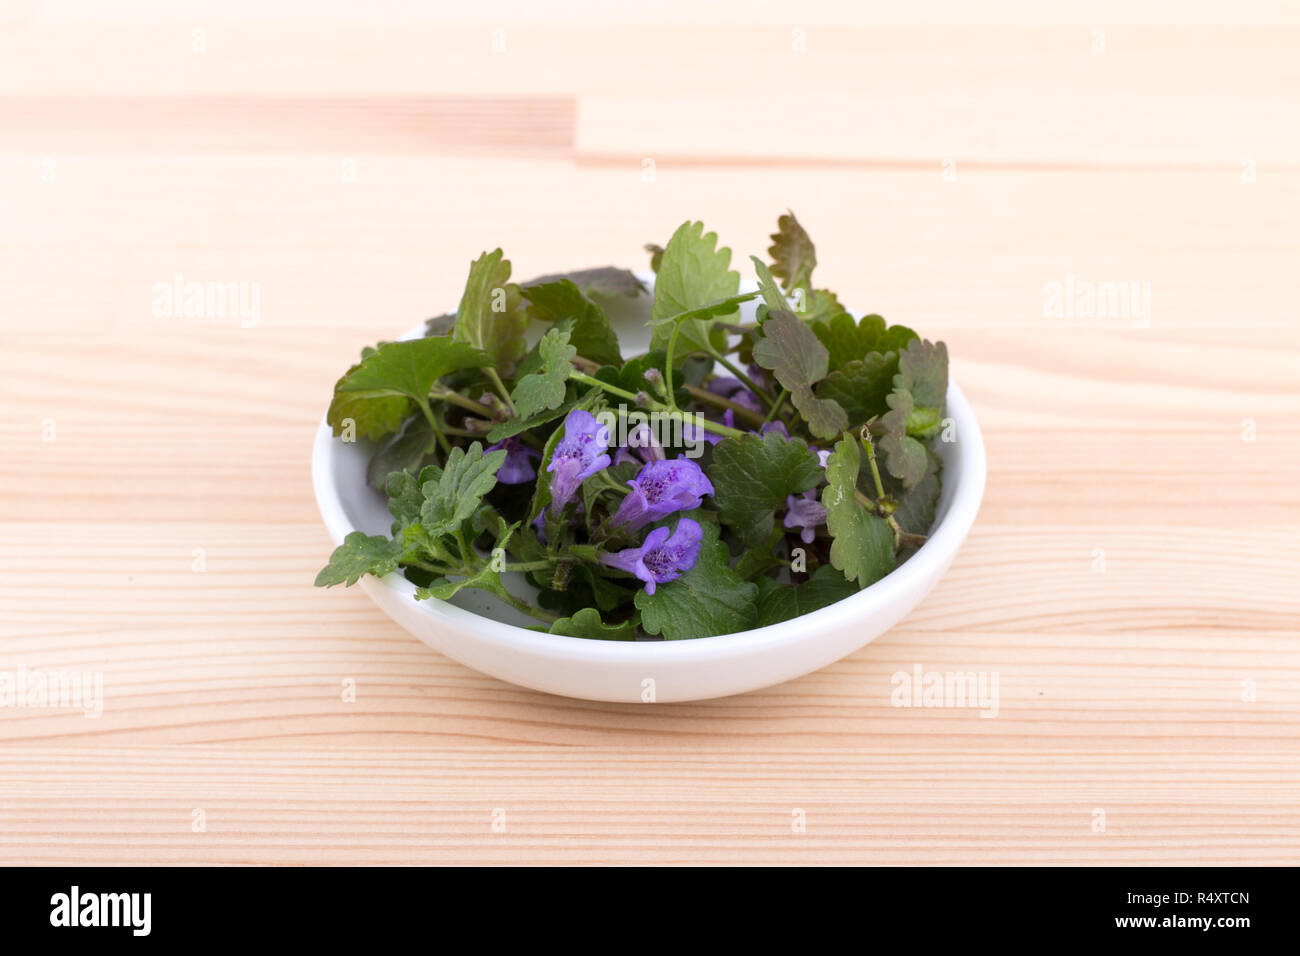 fresh, ground ivy, ivy, Glechoma hederacea, ground ivy, herb, medicinal plant, spices, wild herbs, health, healthy, flowers, leaves, blossom, medicinal plant, plant, nature, porcelain bowl, dish, wood, medicine, ground ivy tea, tea, mint family, wild plan Stock Photo